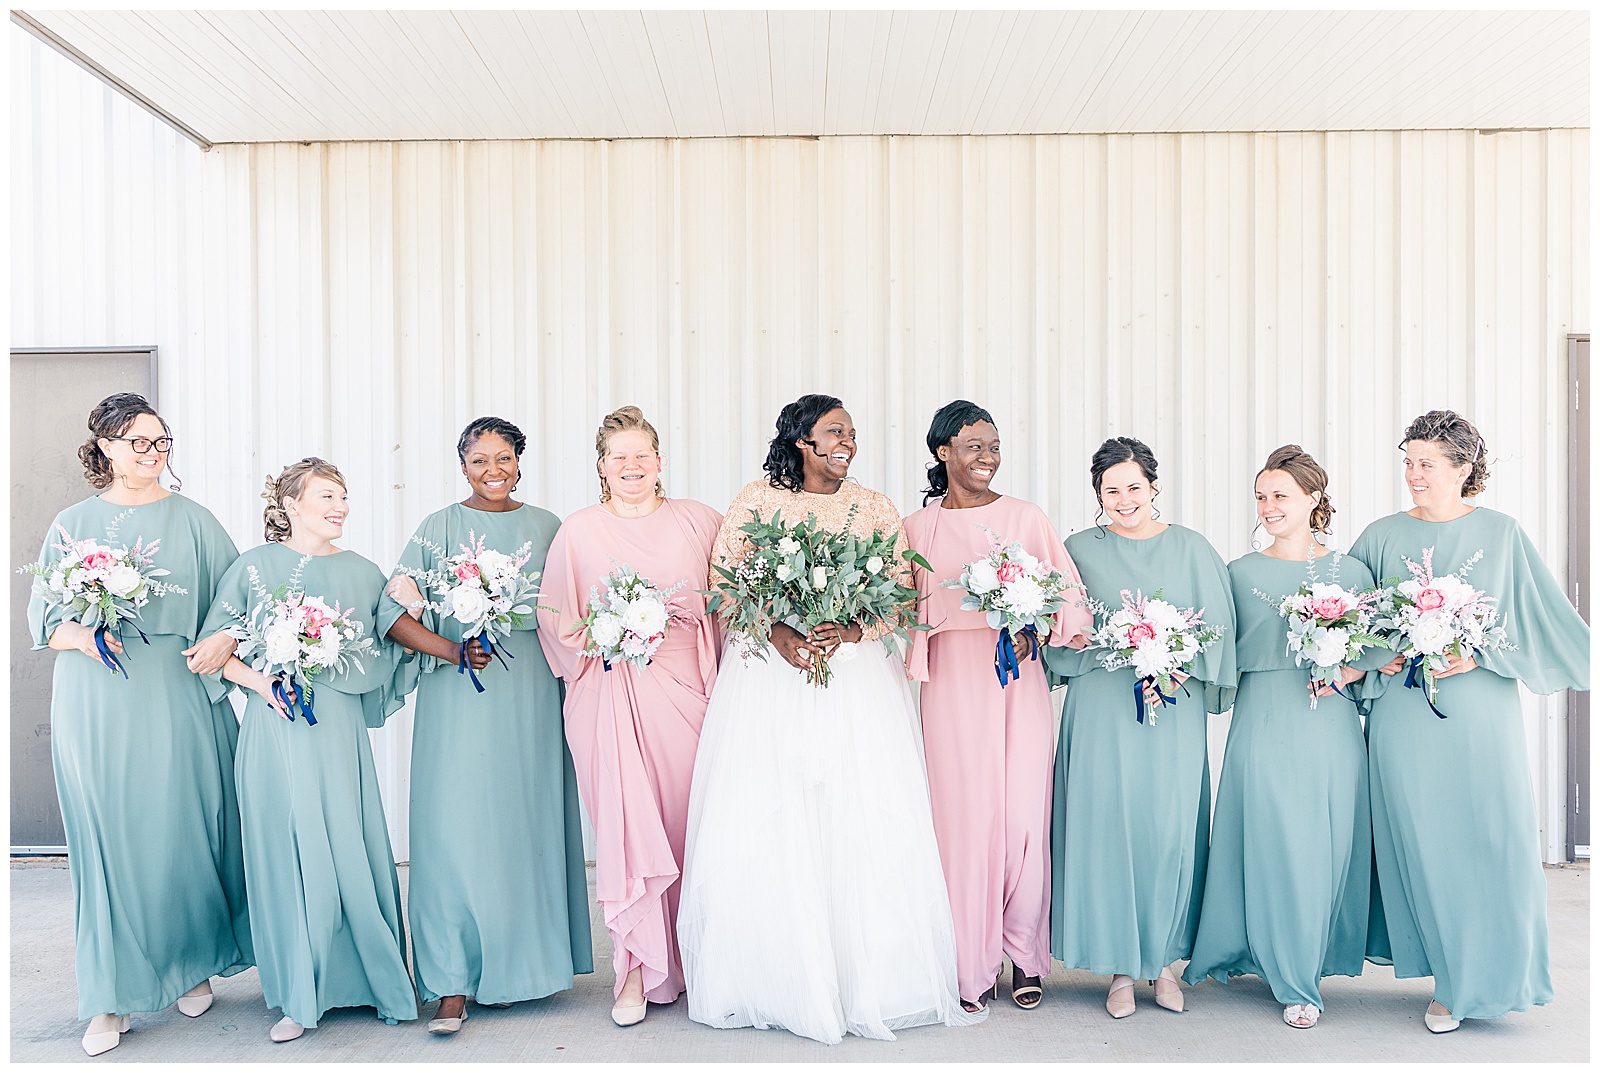 Bride and bridesmaids walking towards camera and laughing in blush and sage green dresses